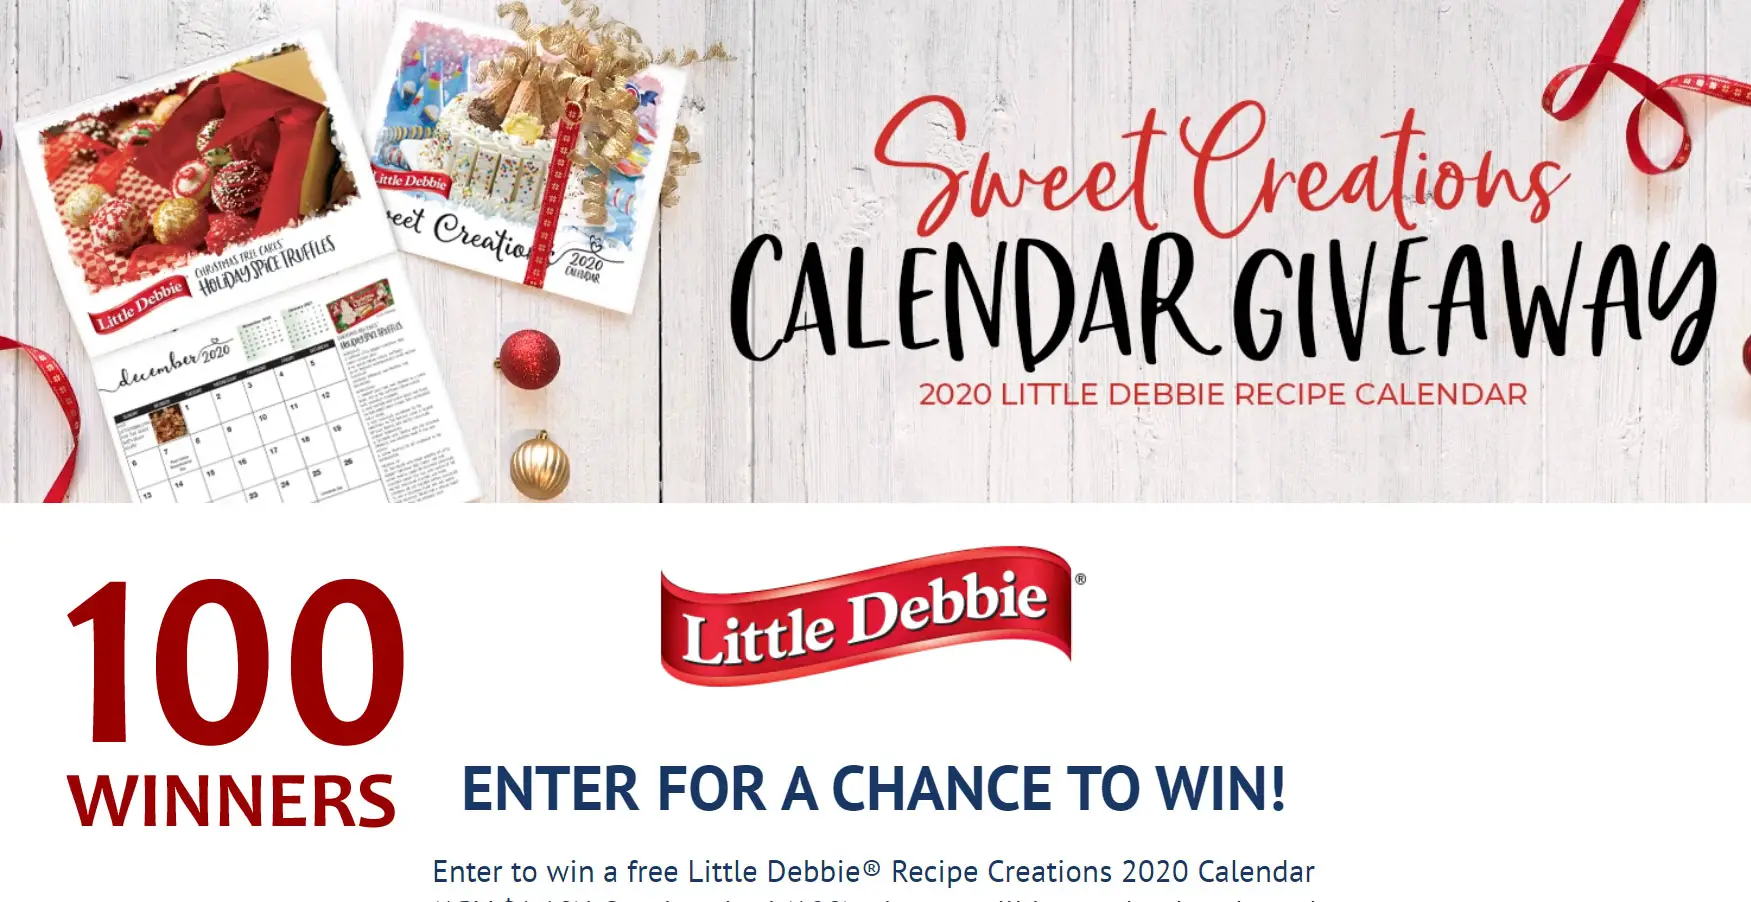 The 2020 Little Debbie Calendar is here and they are giving you the chance to get one for free!  One hundred (100) winners will be randomly selected to win one Recipe Creations 2020 Calendar. Winners will be announced on LittleDebbie.com and contacted via the provided email address. 